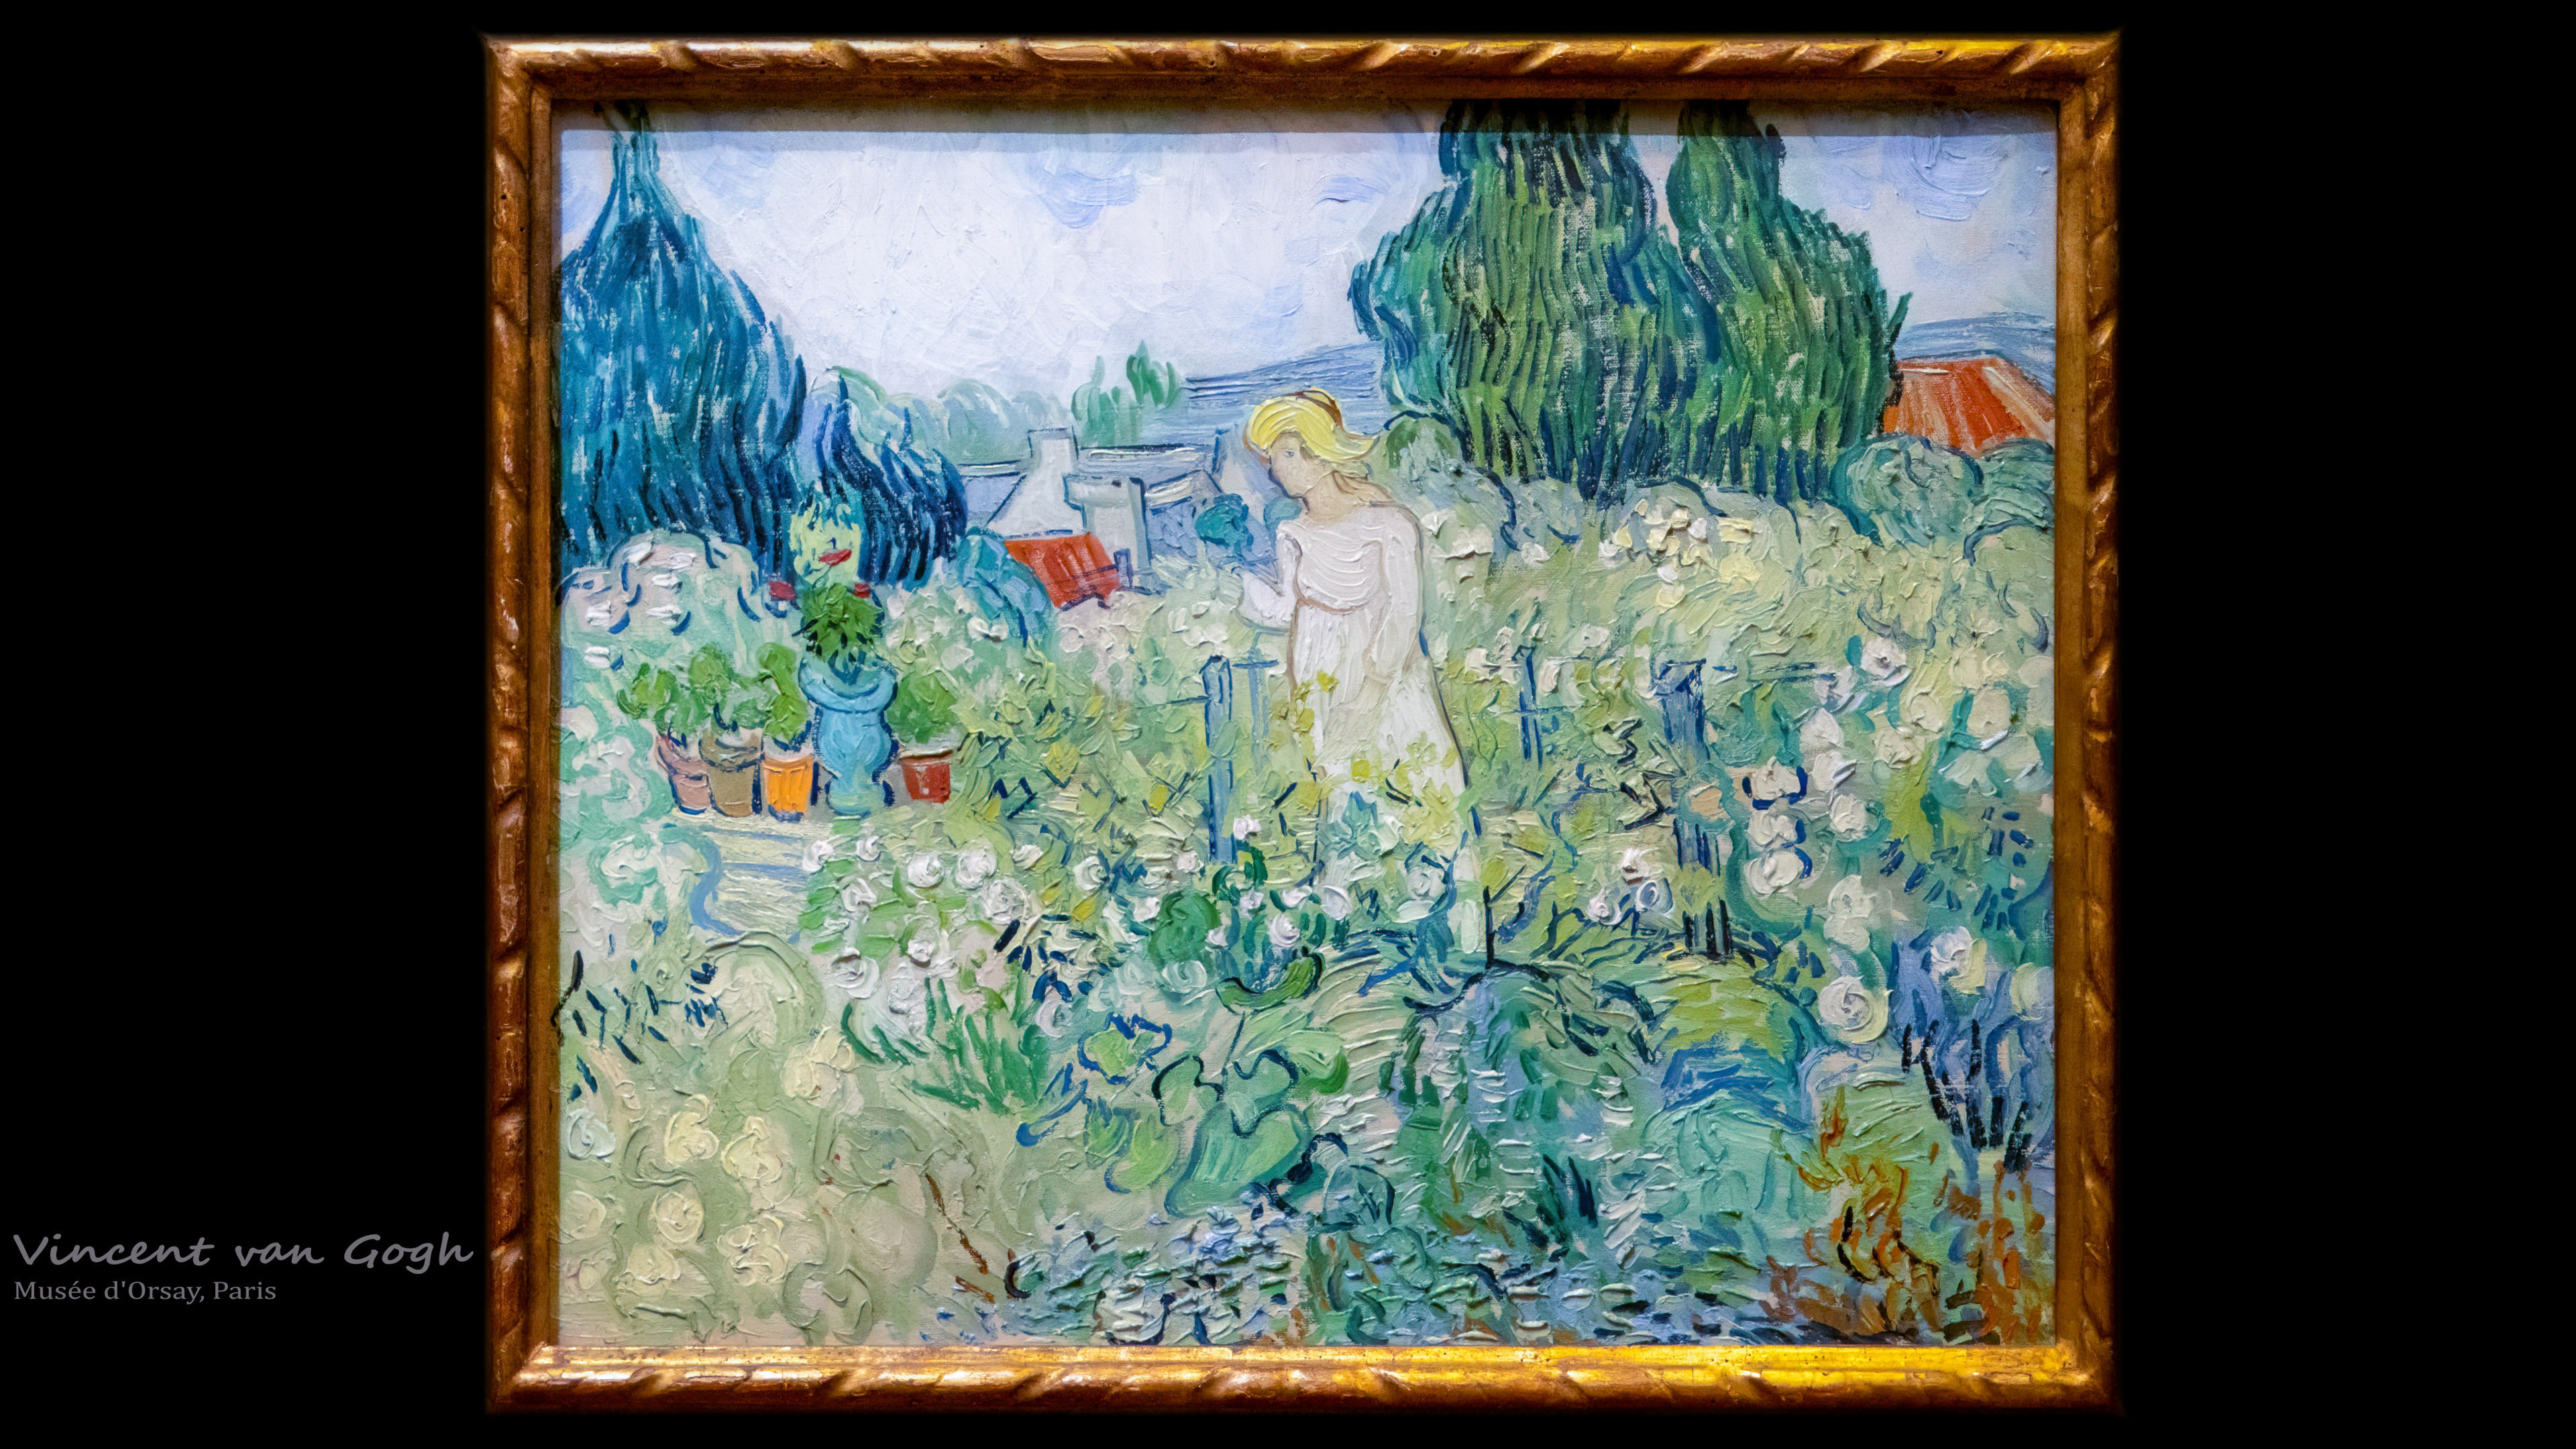 Admire the delicate and expressive brushstrokes of Van Gogh’s painting 'Marguerite Gachet in the Garden' with our 4K wallpaper for desktop.